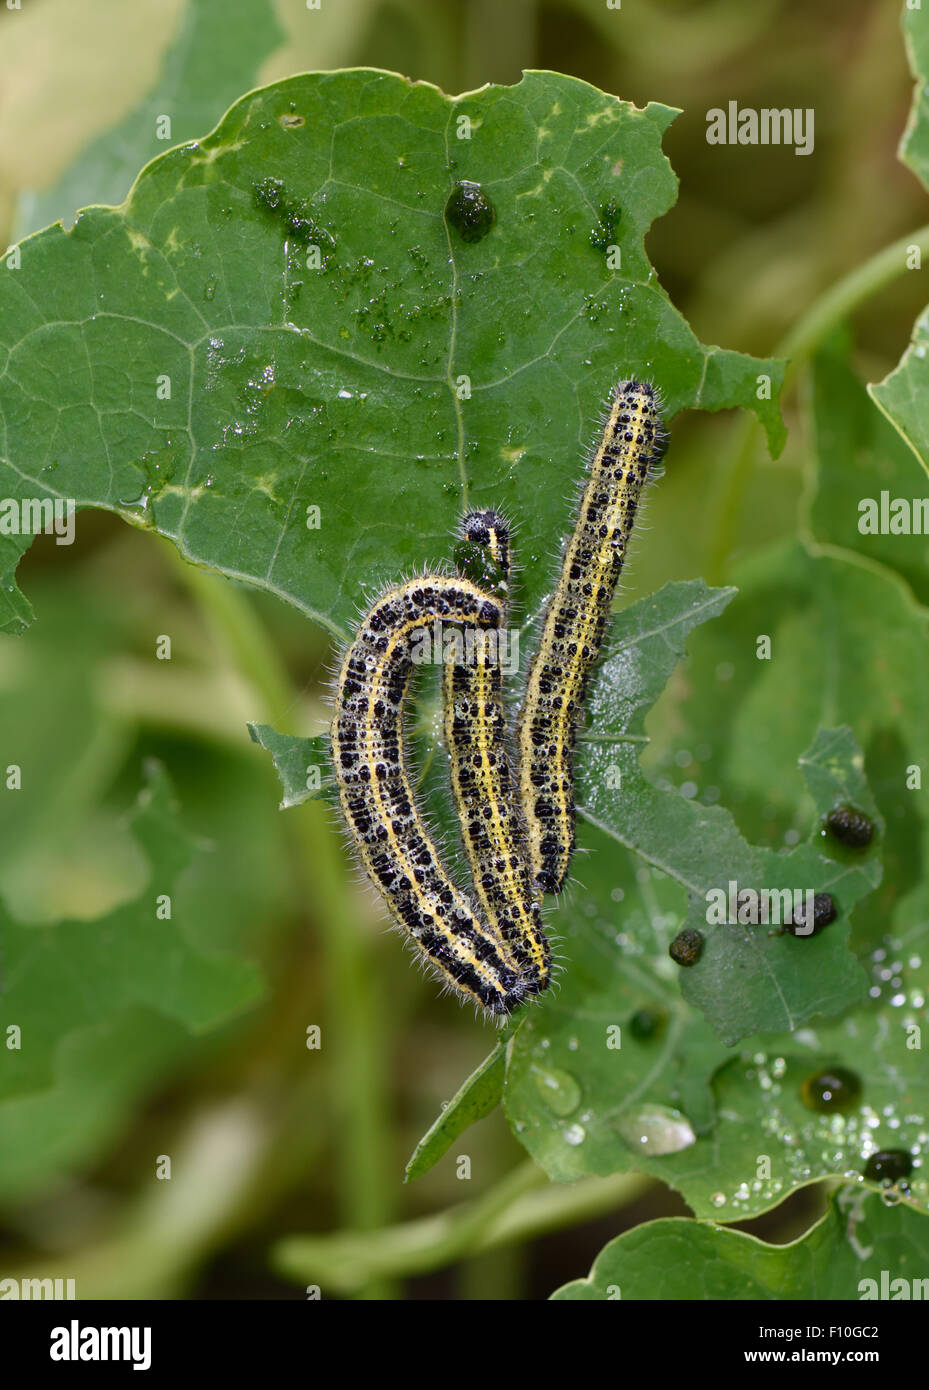 Large or cabbage white butterfly, Pieris brassicae, large caterpillars on a damaged nasturtium leaf Stock Photo